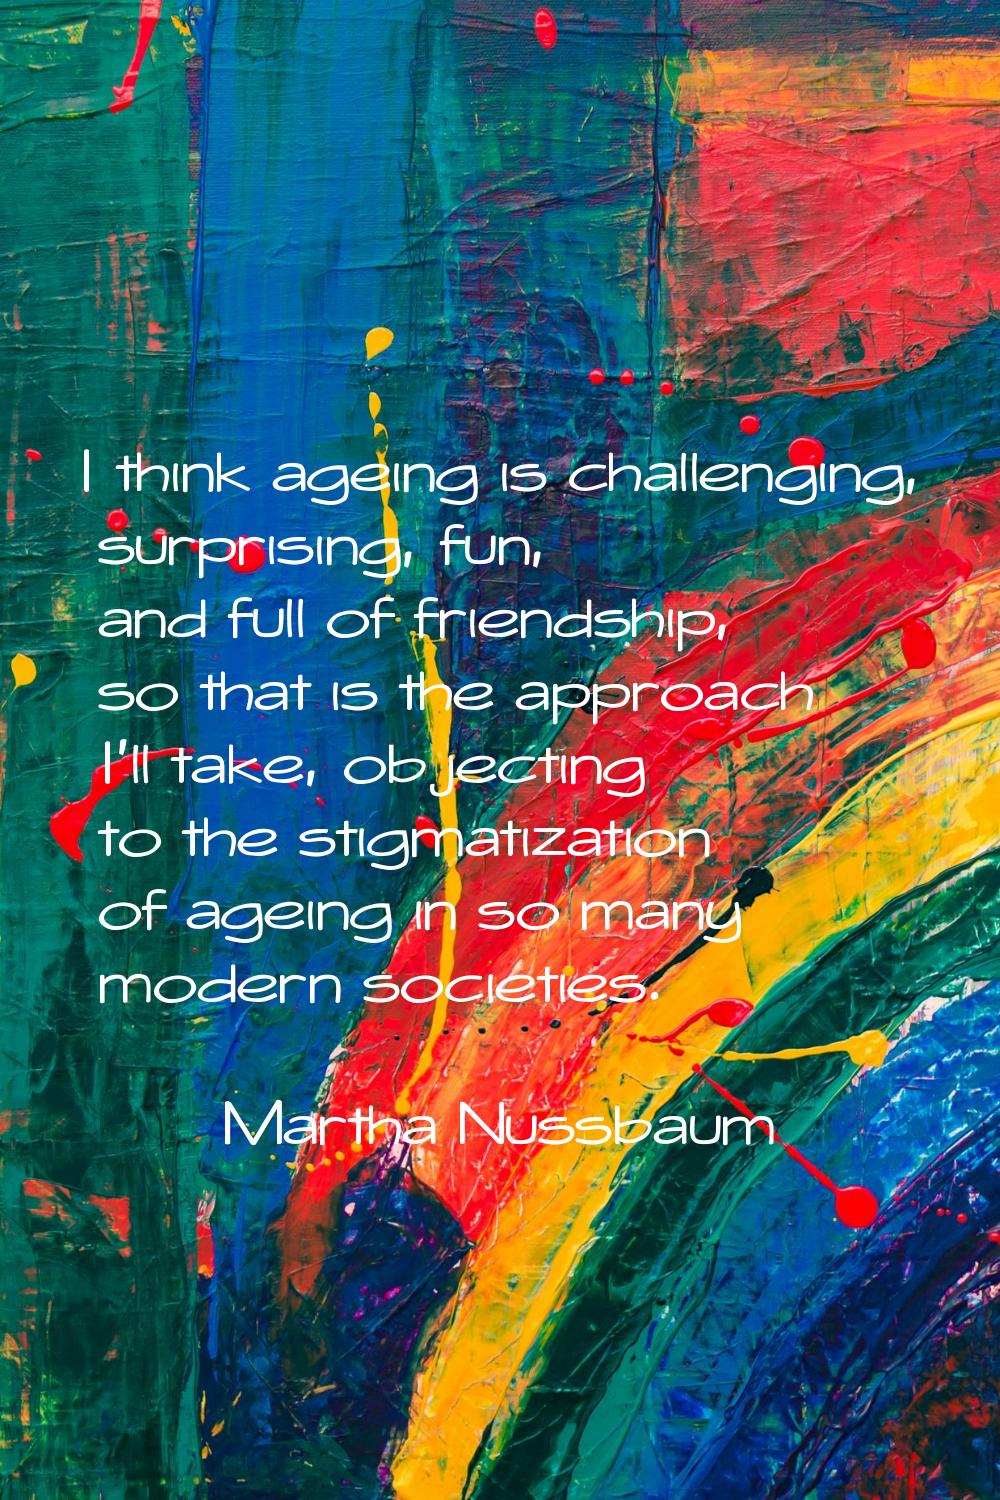 I think ageing is challenging, surprising, fun, and full of friendship, so that is the approach I'l